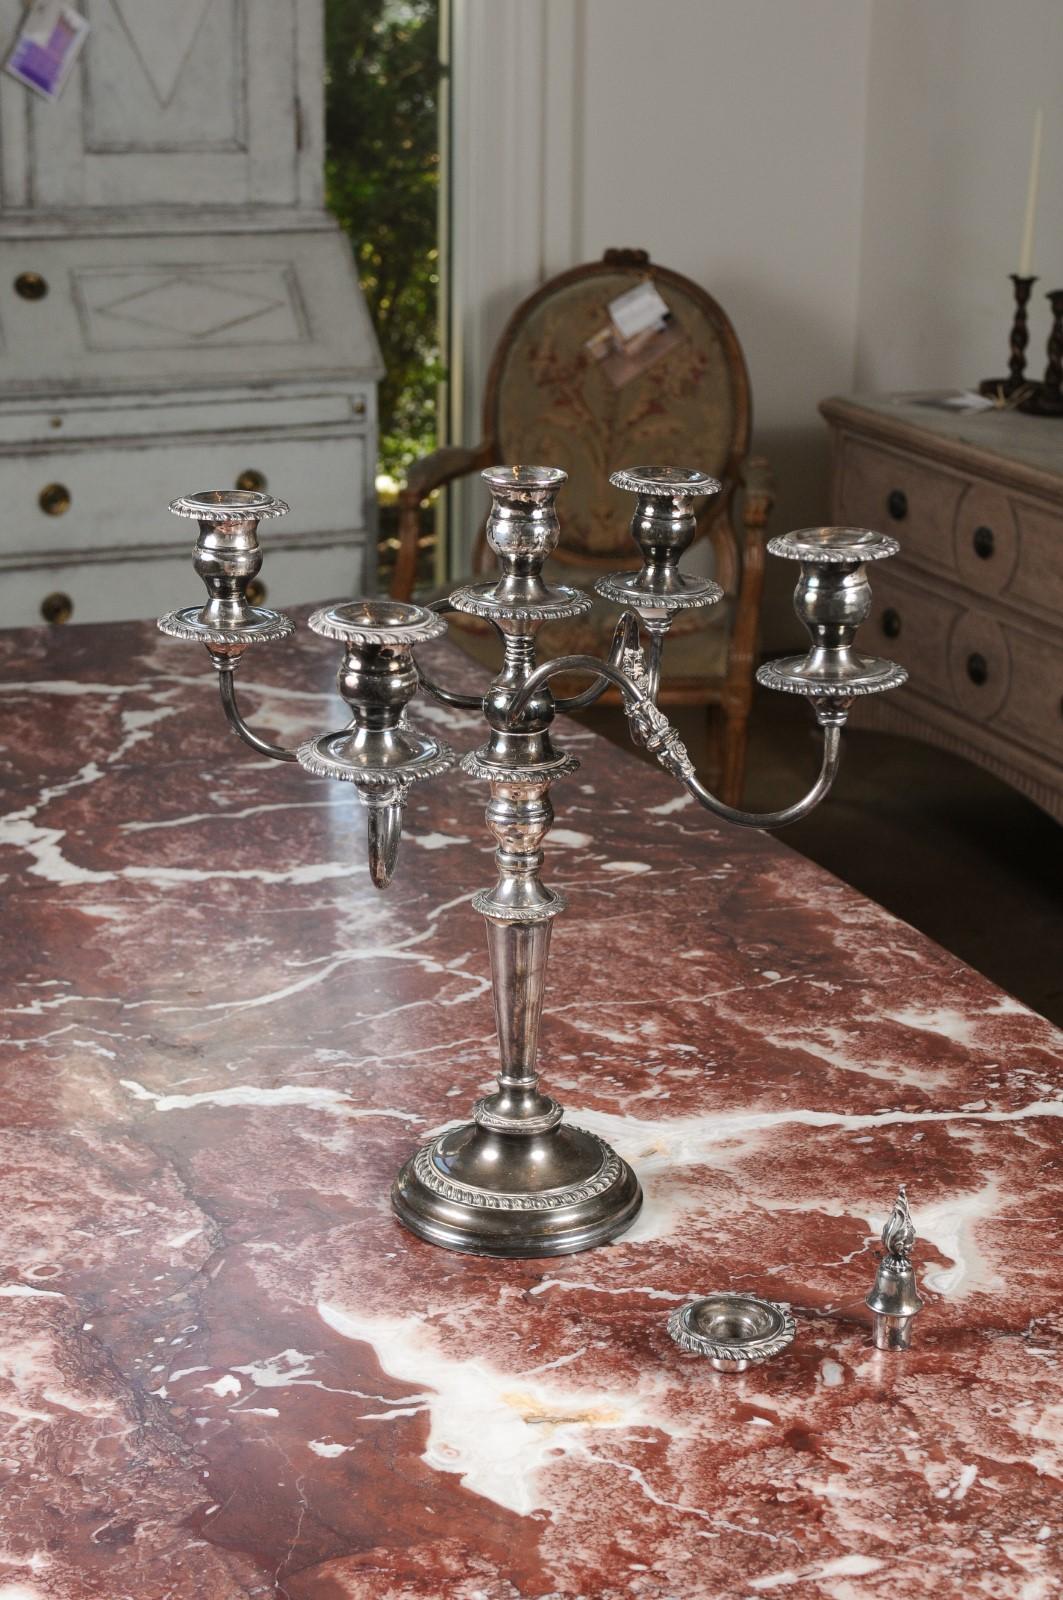 American Silver Plated Four-Arm Candelabra with Foliage and Scrolling Accents 3